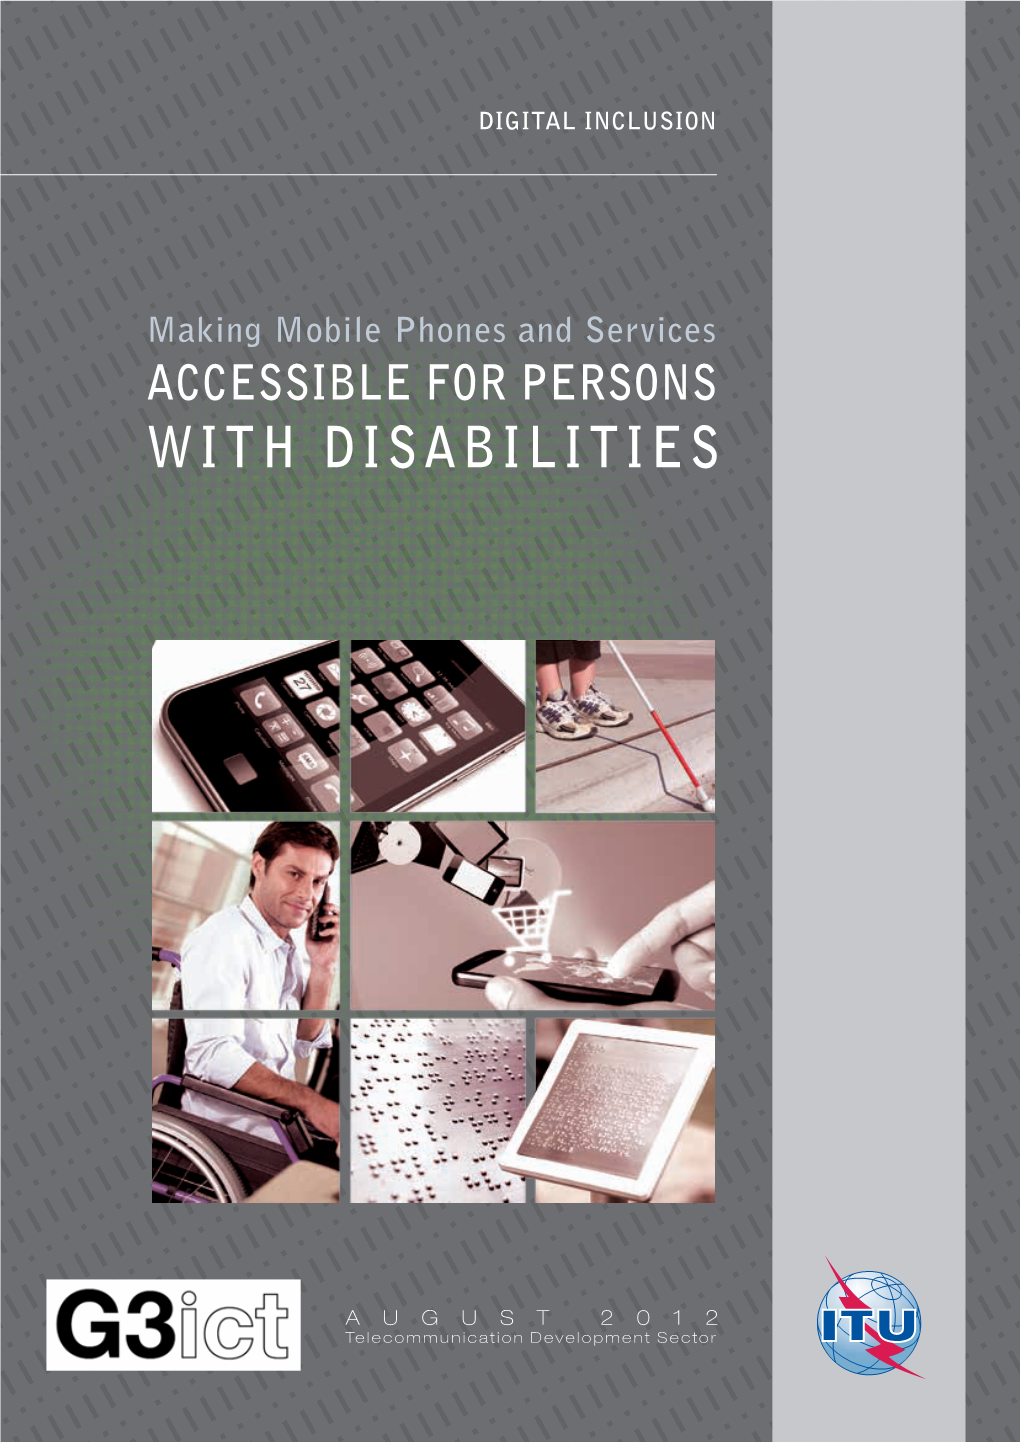 Making Mobile Phones and Services CH-1211 Geneva 20 Accessible for Persons Switzerland with Disabilities